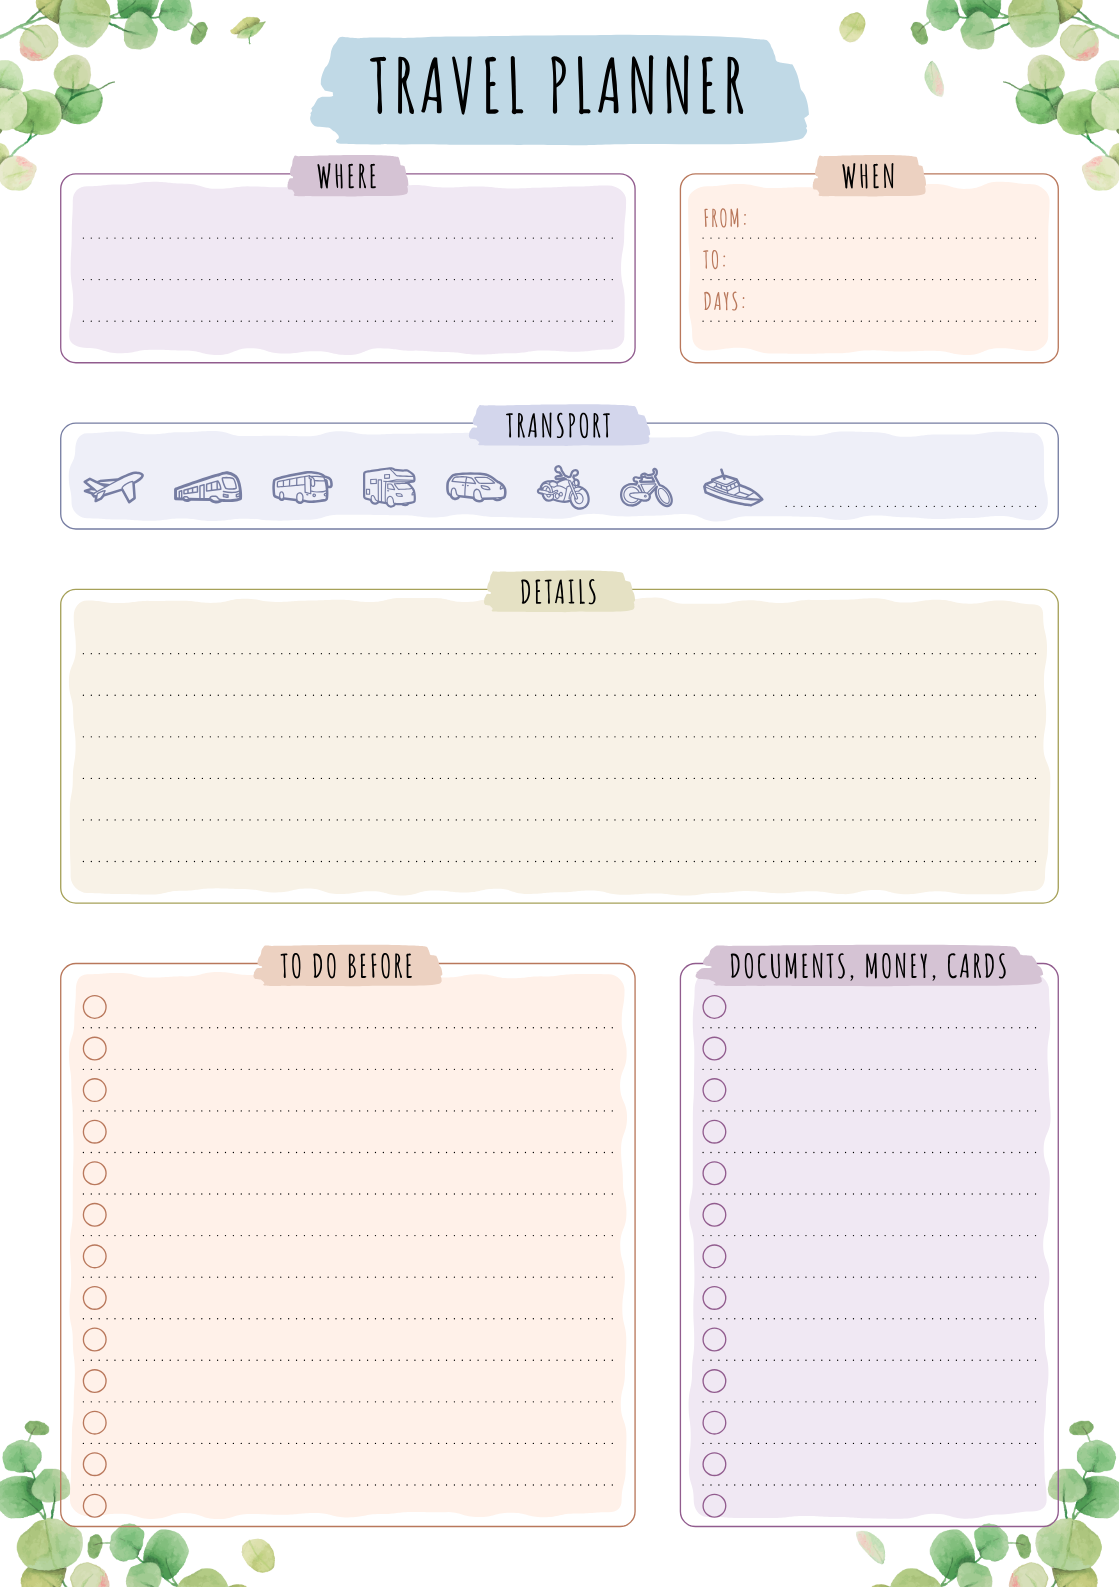 Download Printable Travel Planner - Floral Style PDF Regarding Travel Planner Itinerary Template Inside Travel Planner Itinerary Template